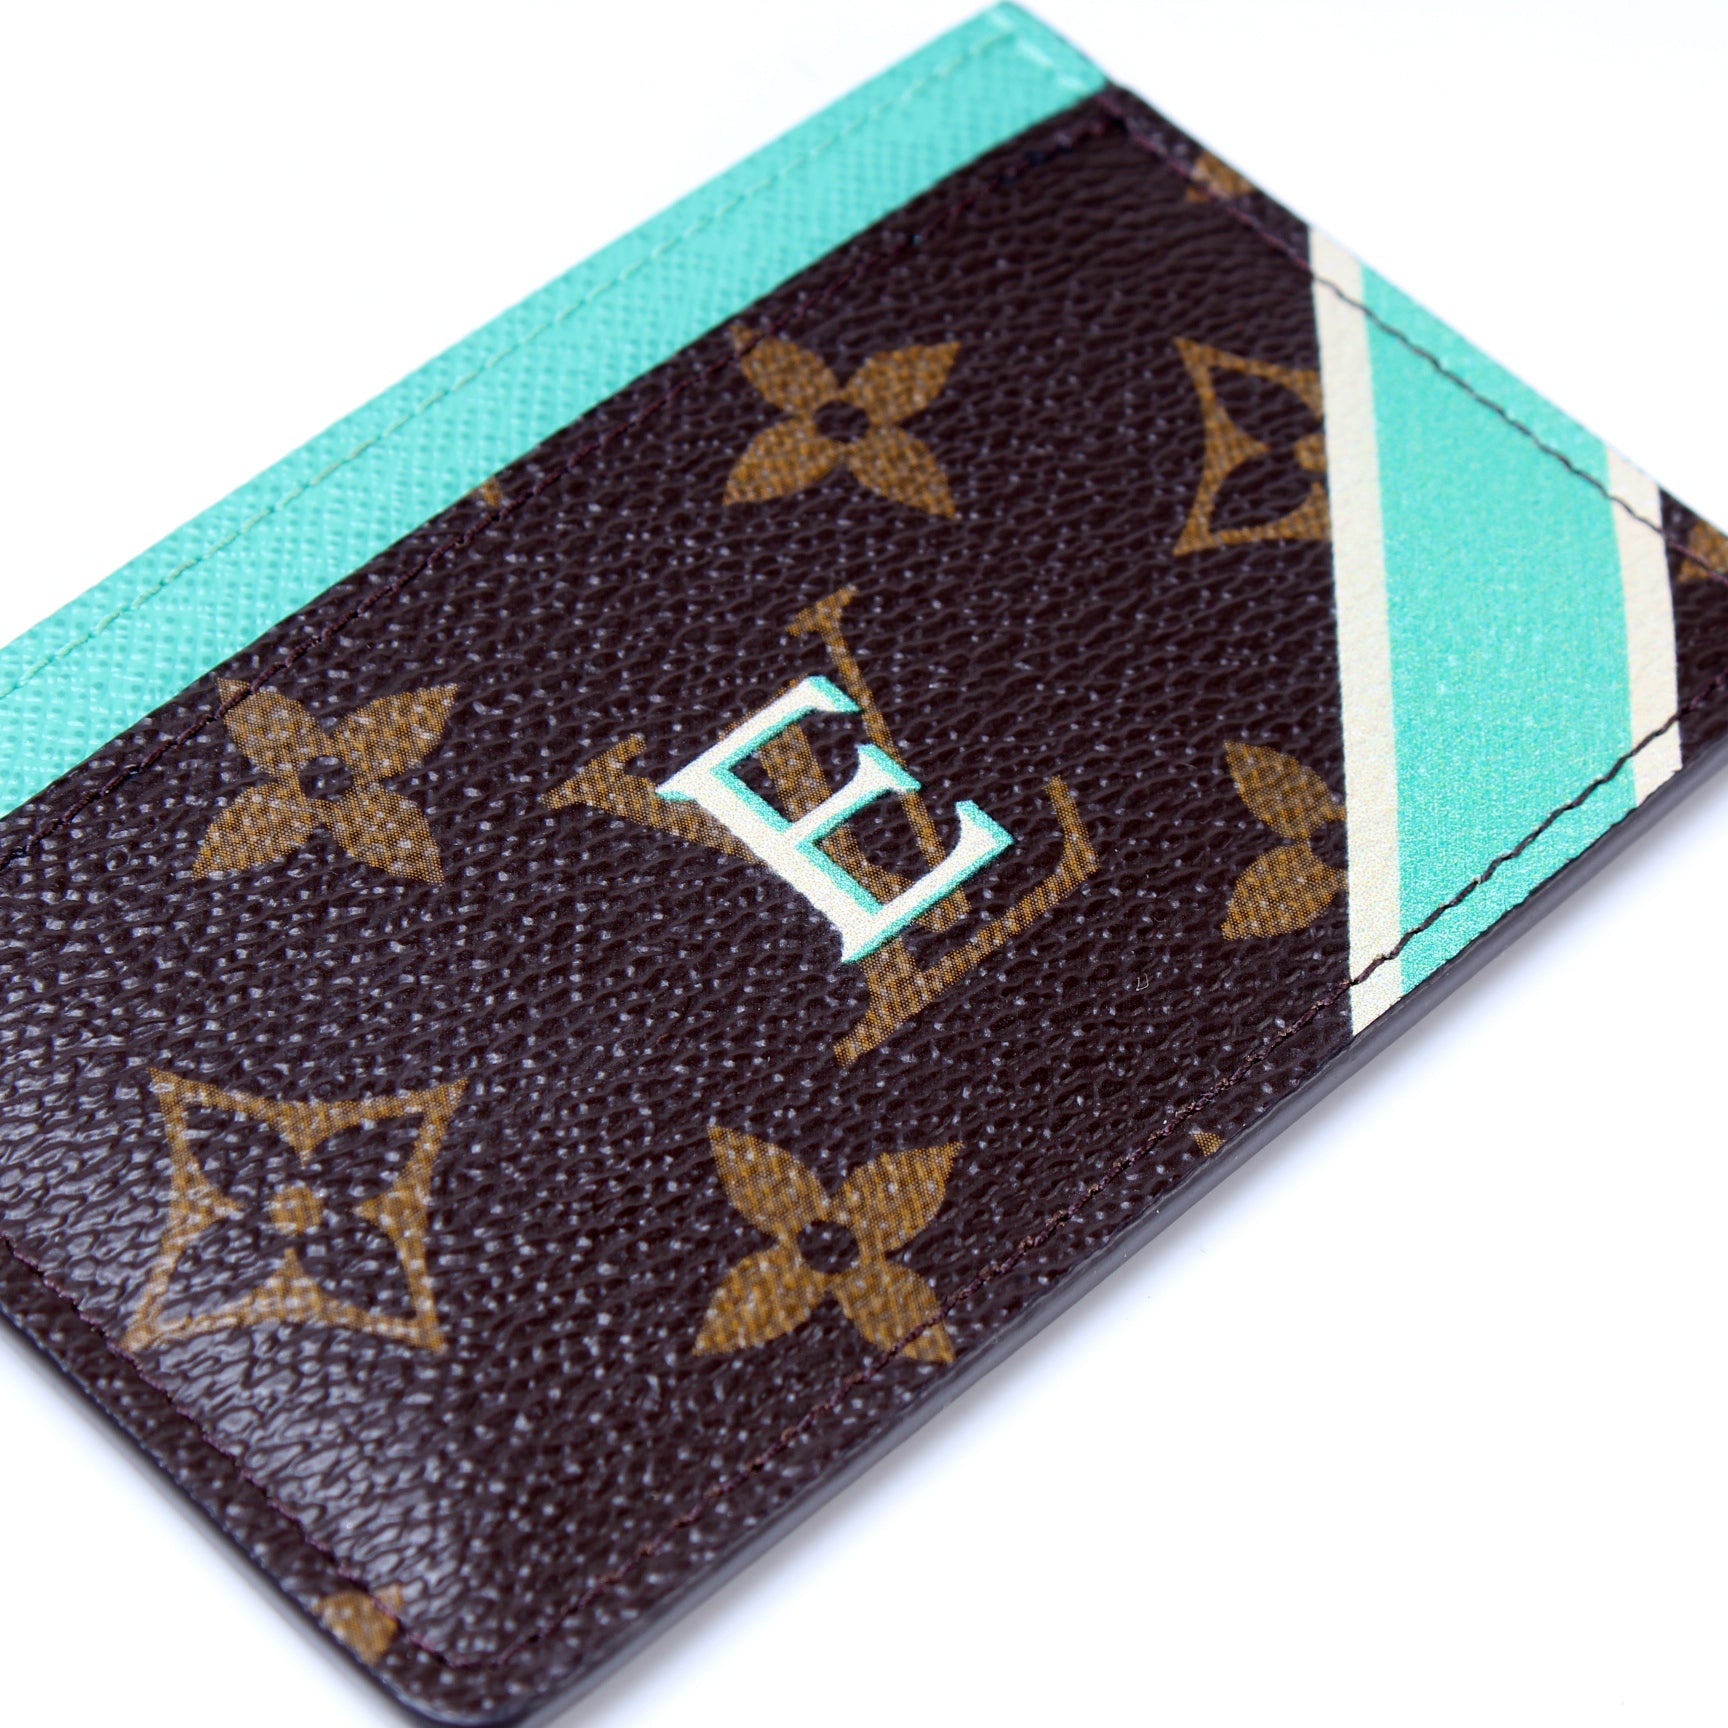 Card Holder My LV Heritage Monogram - Bags - Personalization Leather Goods